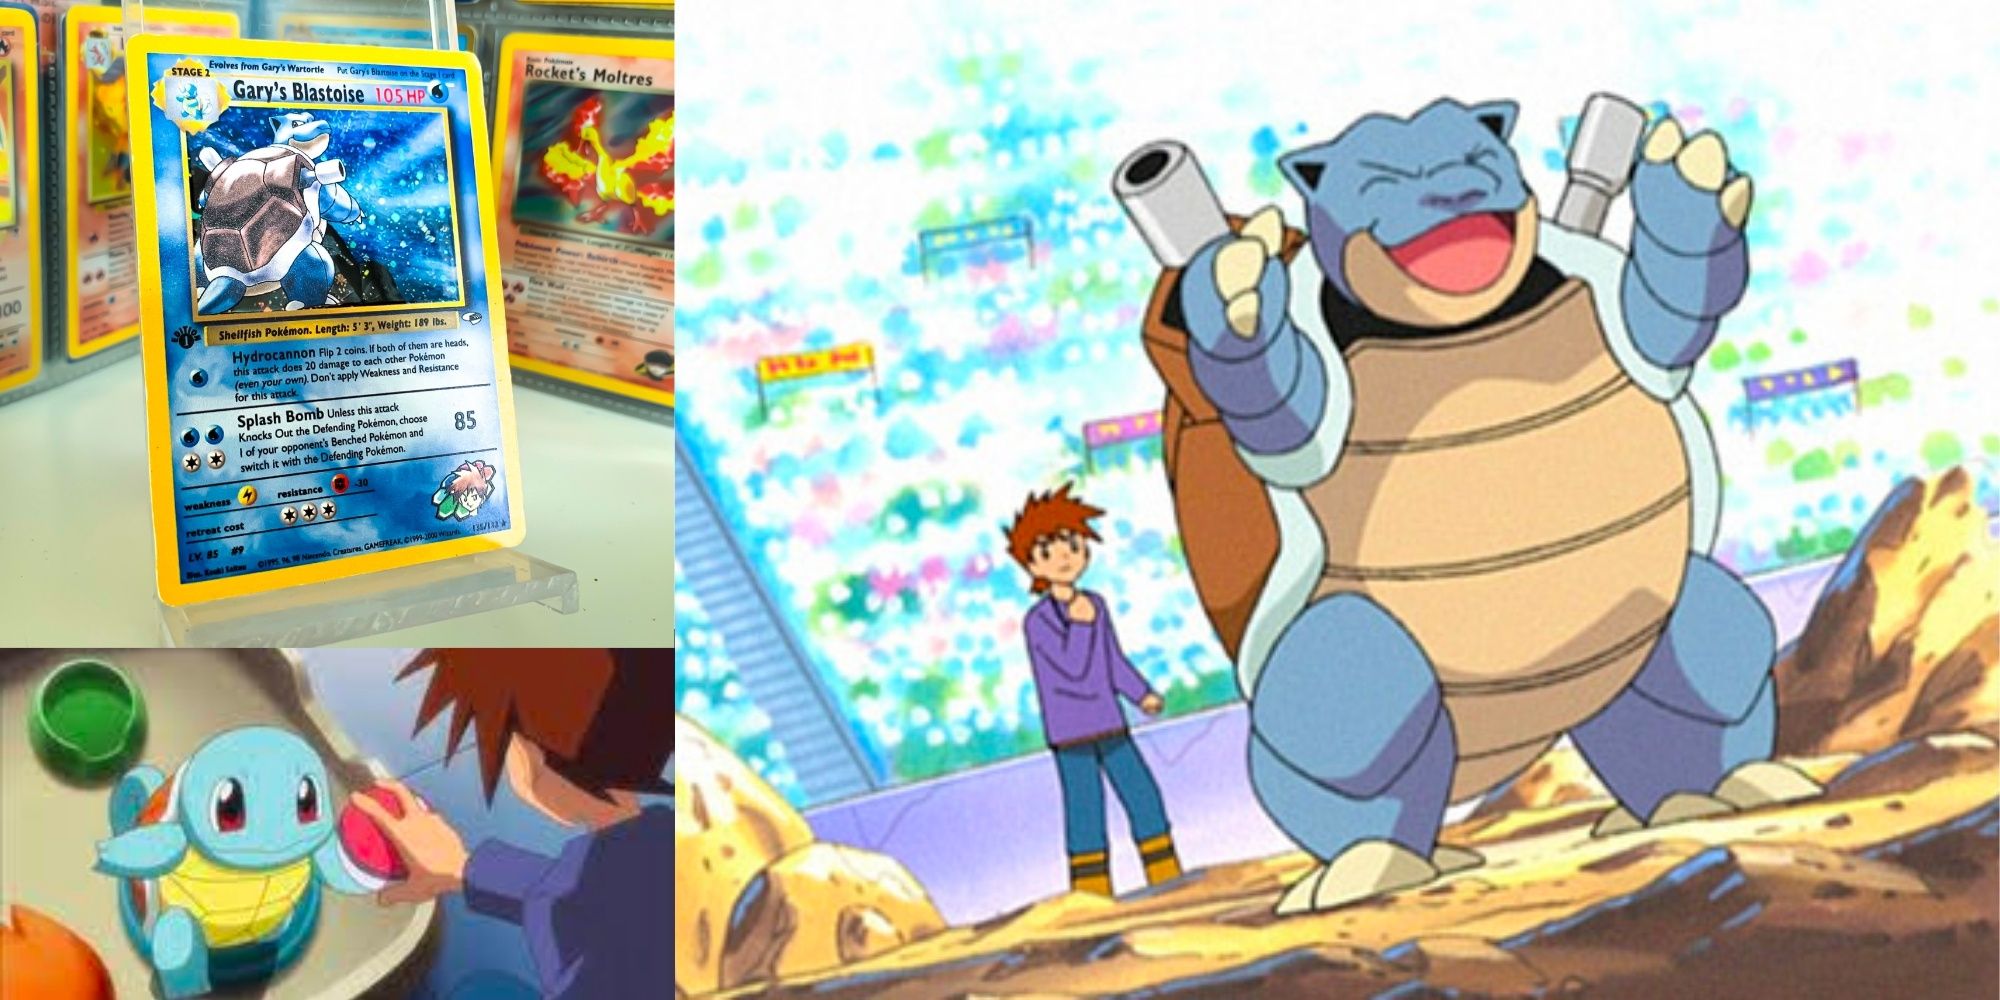 Blastoise battling with Gary, rare pokemon card, Gary and Squirtle Nintendo Game and Anime Pokemon 